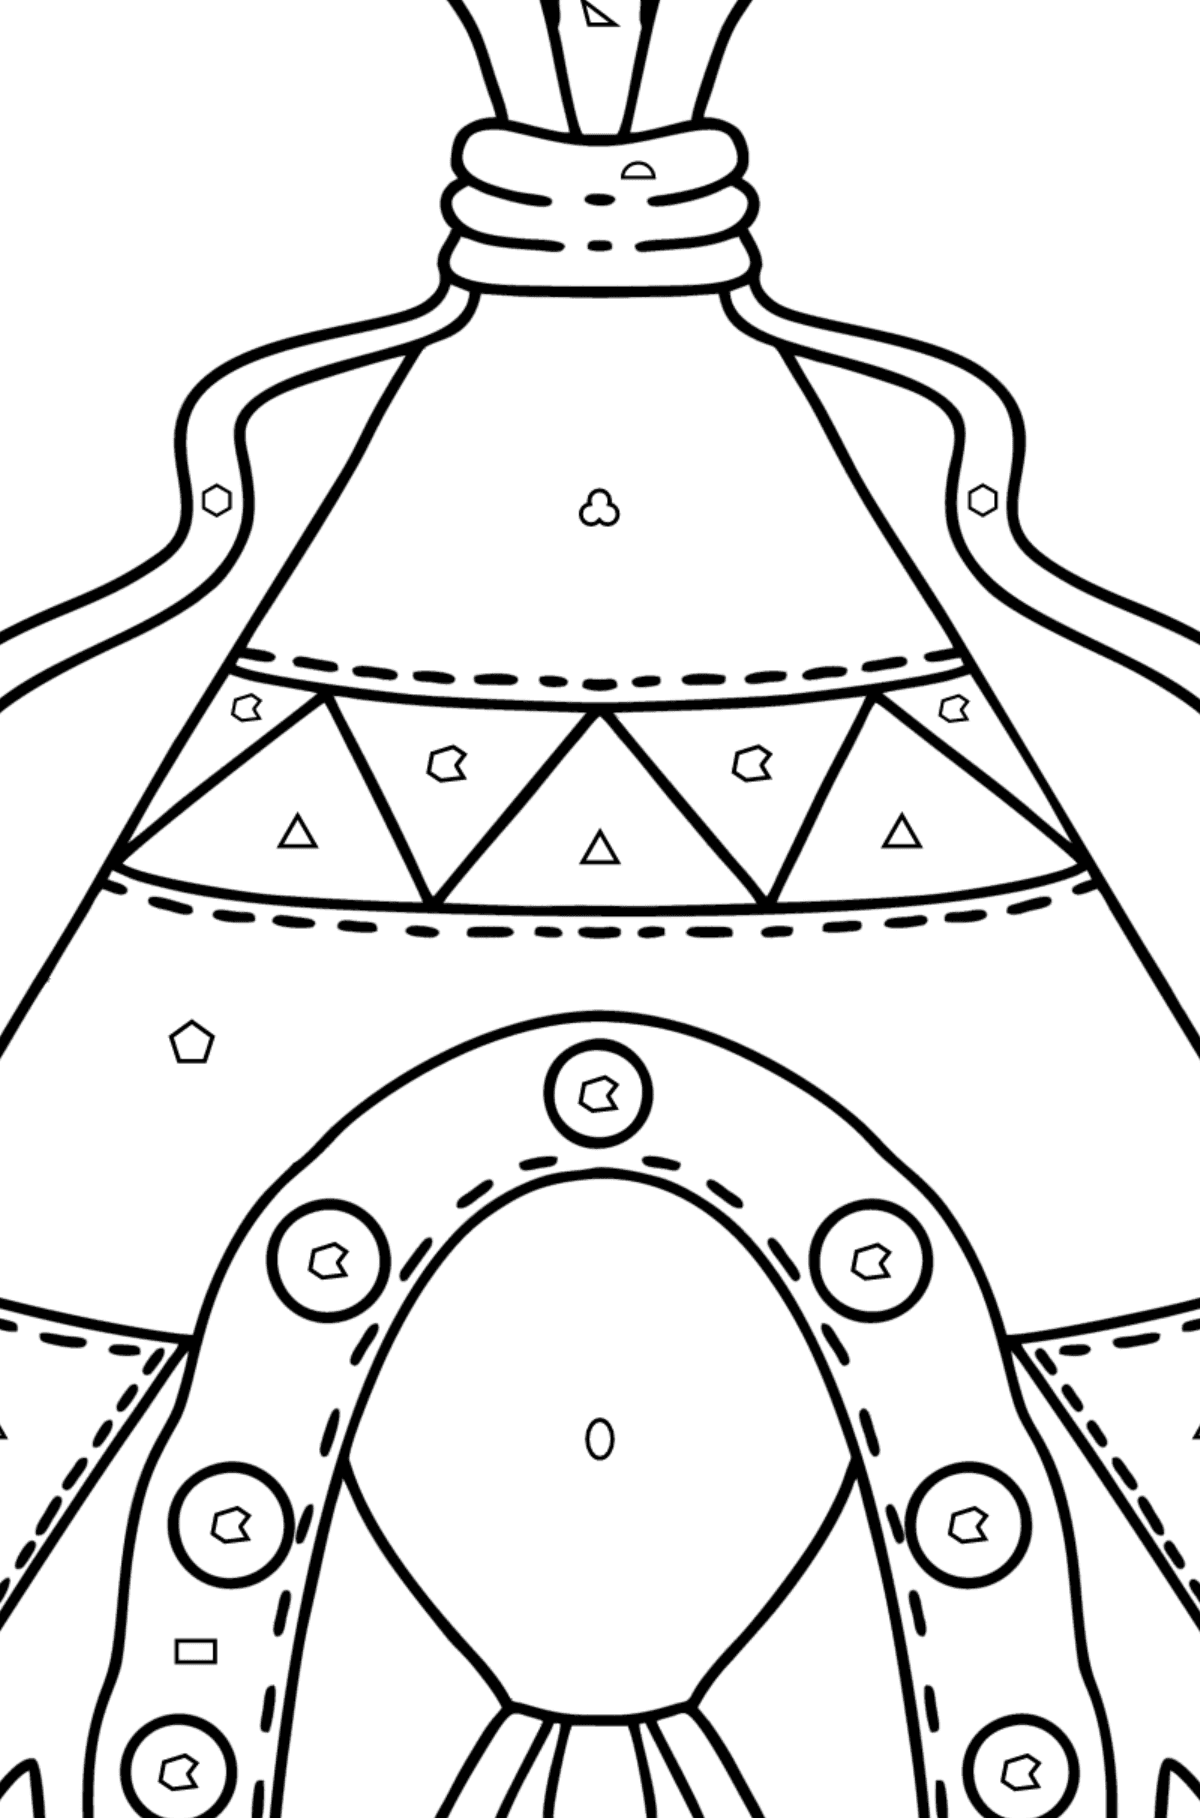 Tepee coloring page - Coloring by Geometric Shapes for Kids